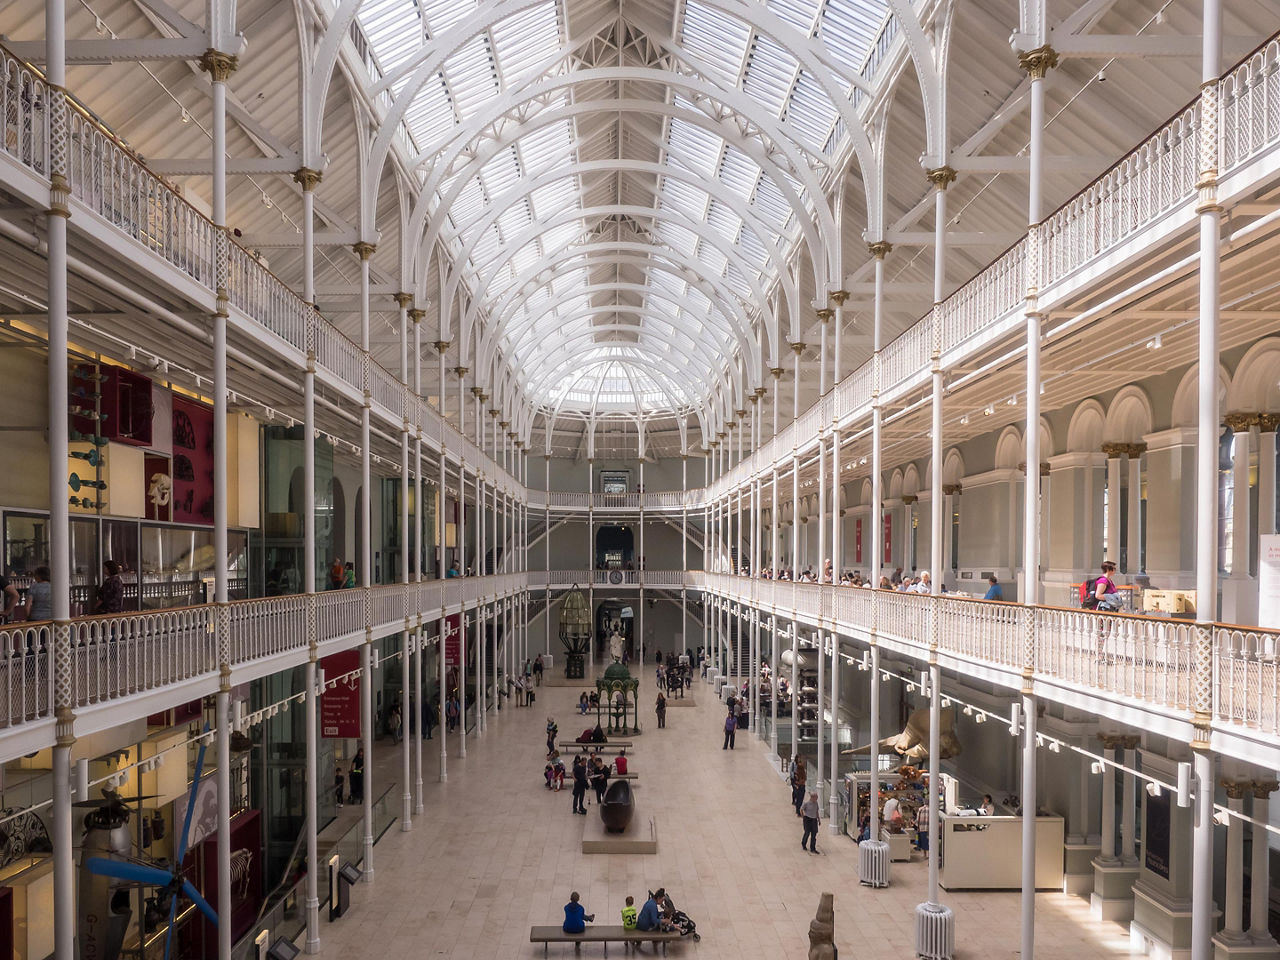 Interior view of the National Museum of Scotland